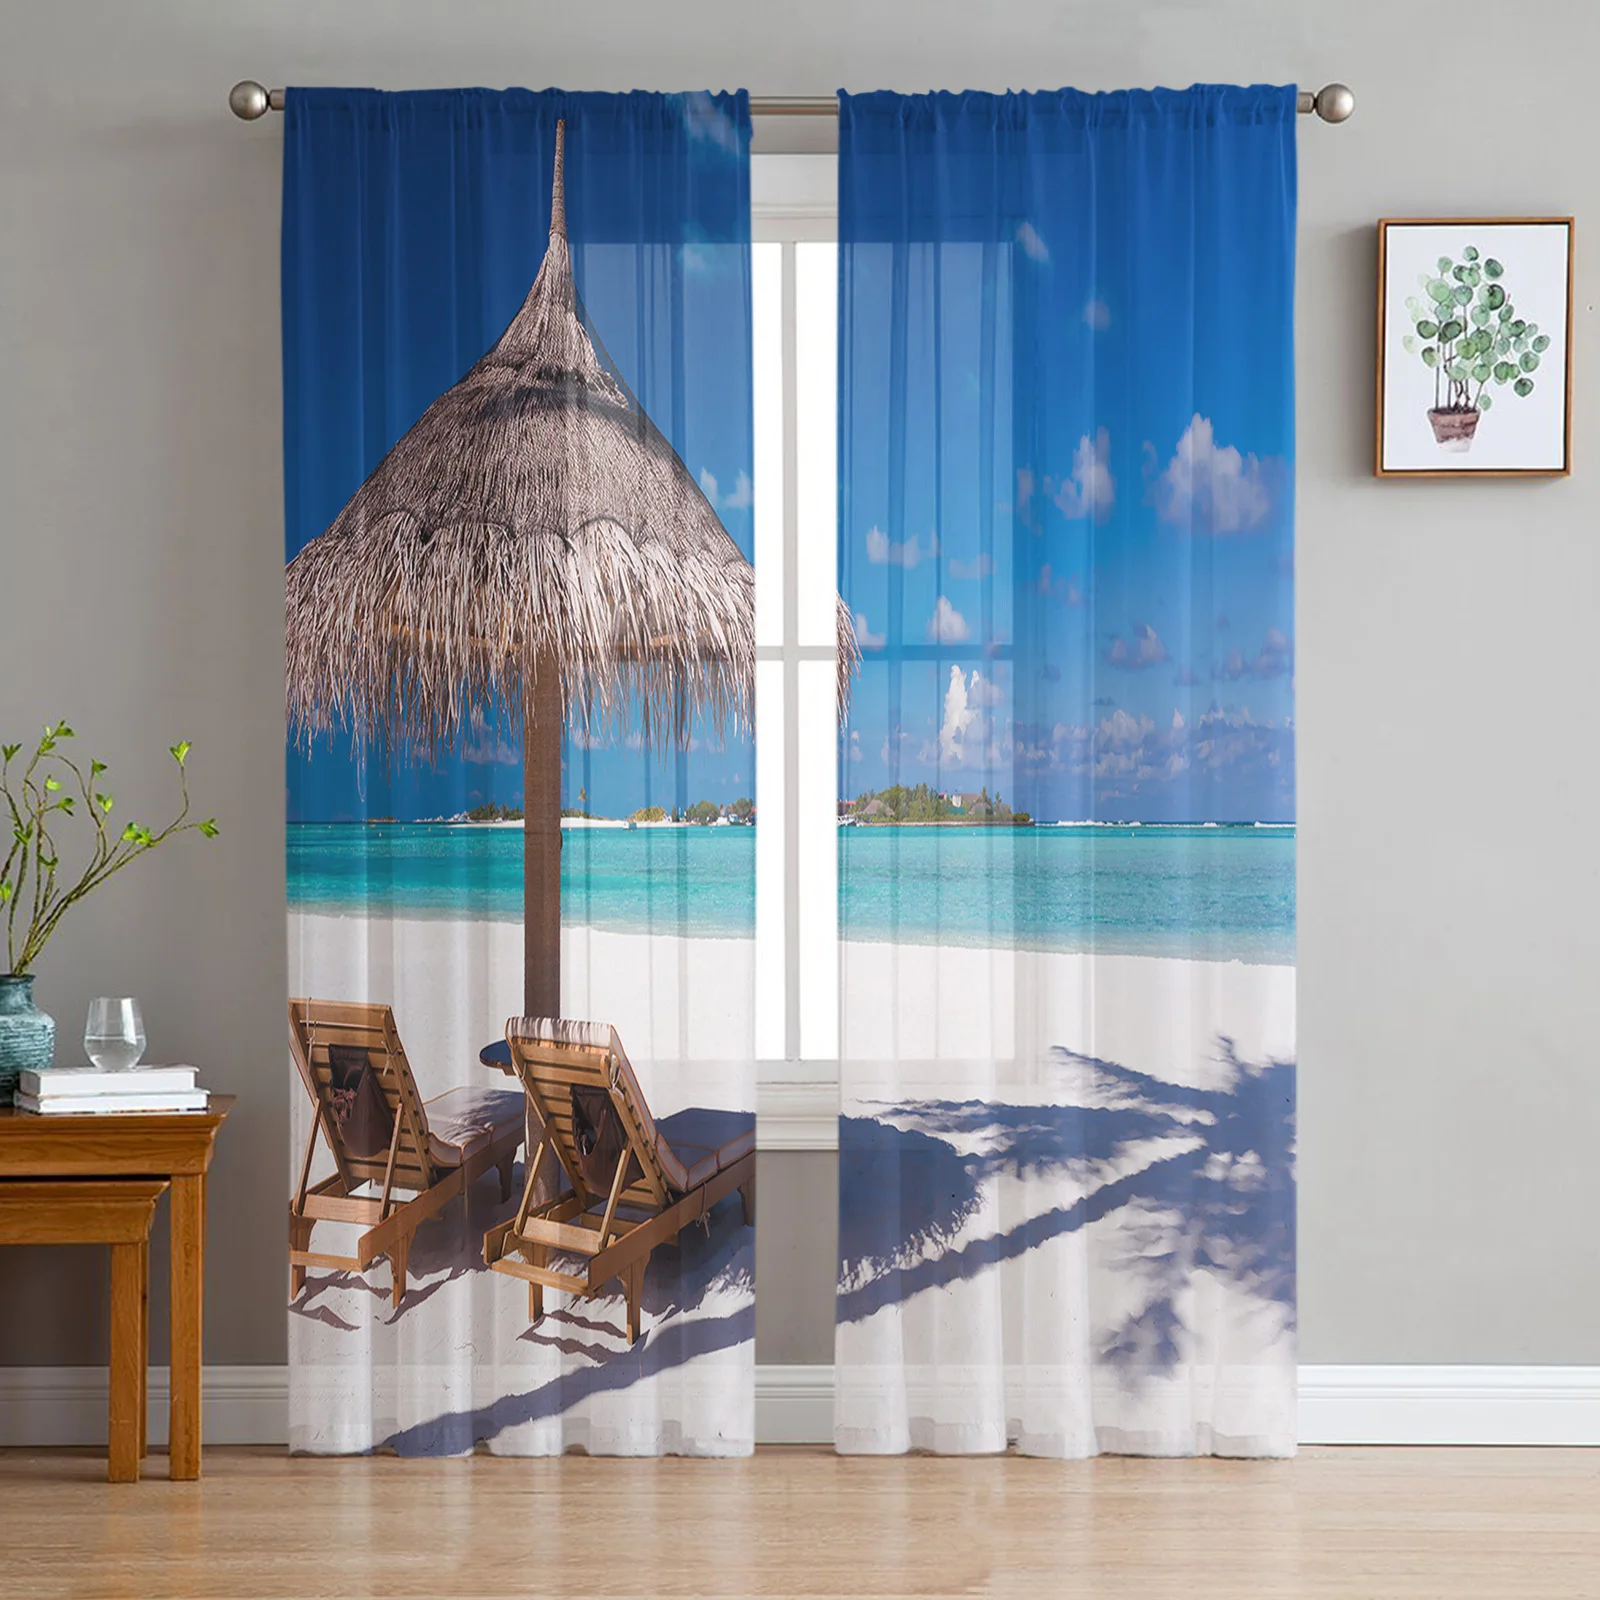 Seaside Scenery White Sand Beach Ocean Tulle Curtains Living Room Bedroom Kitchen Decoration Chiffon Sheer Voile Window Curtains